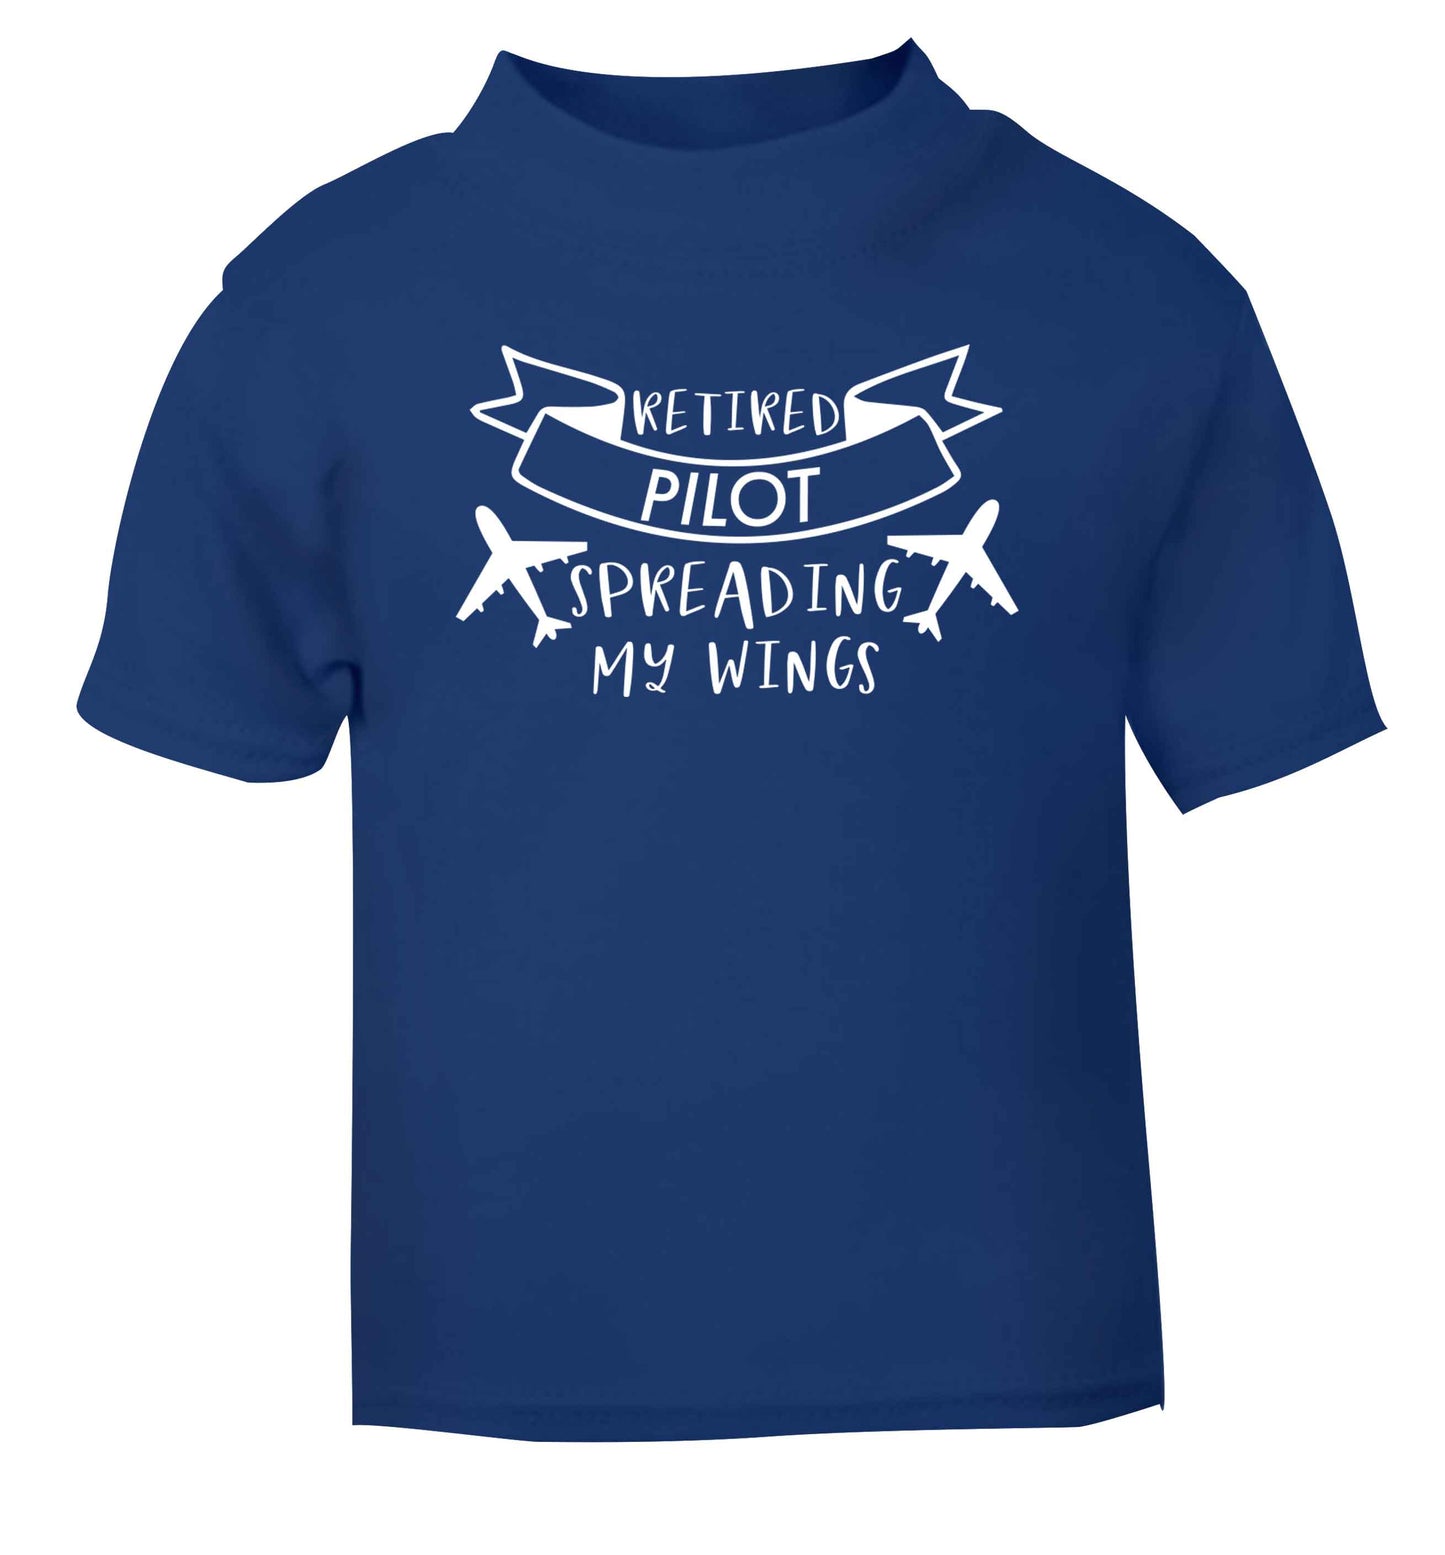 Retired pilot spreading my wings blue Baby Toddler Tshirt 2 Years